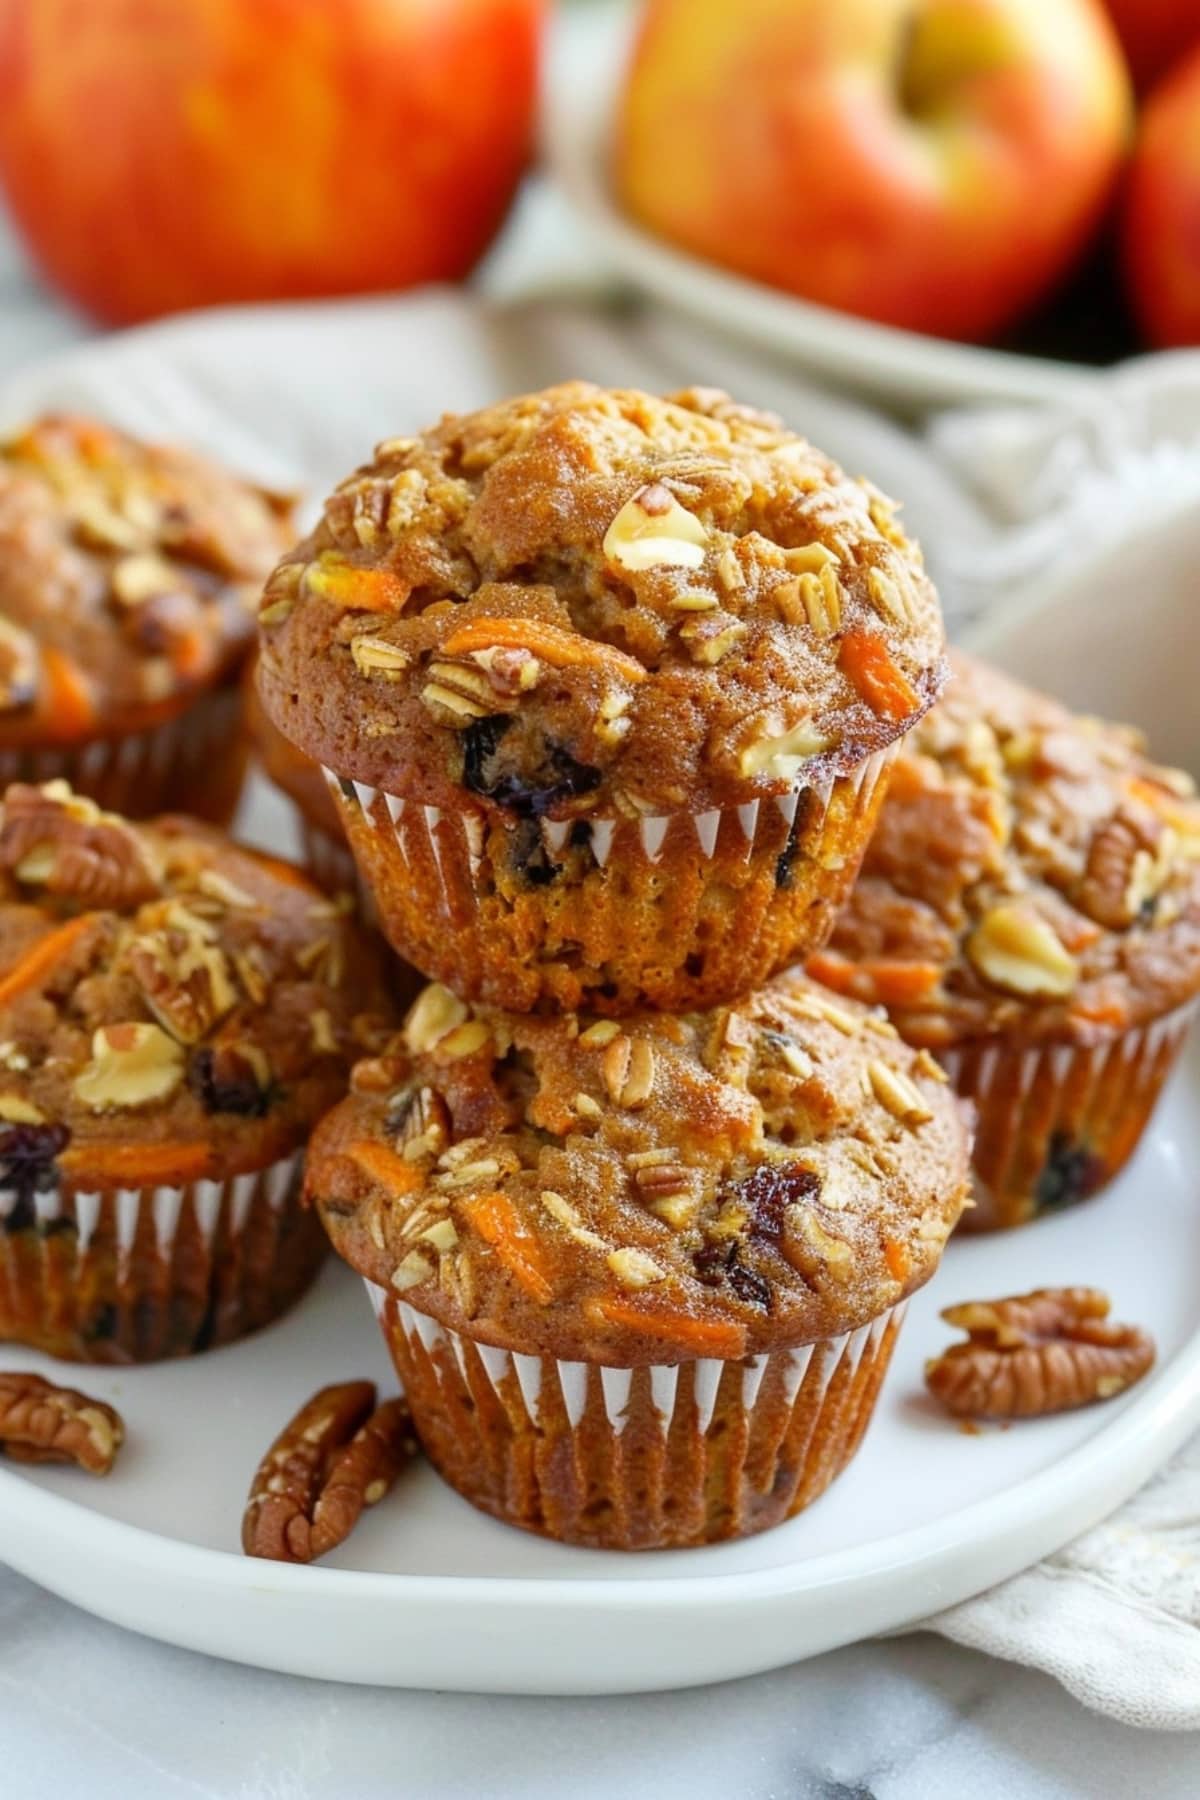 Stack of morning glory muffins with walnuts, raisins and carrots.